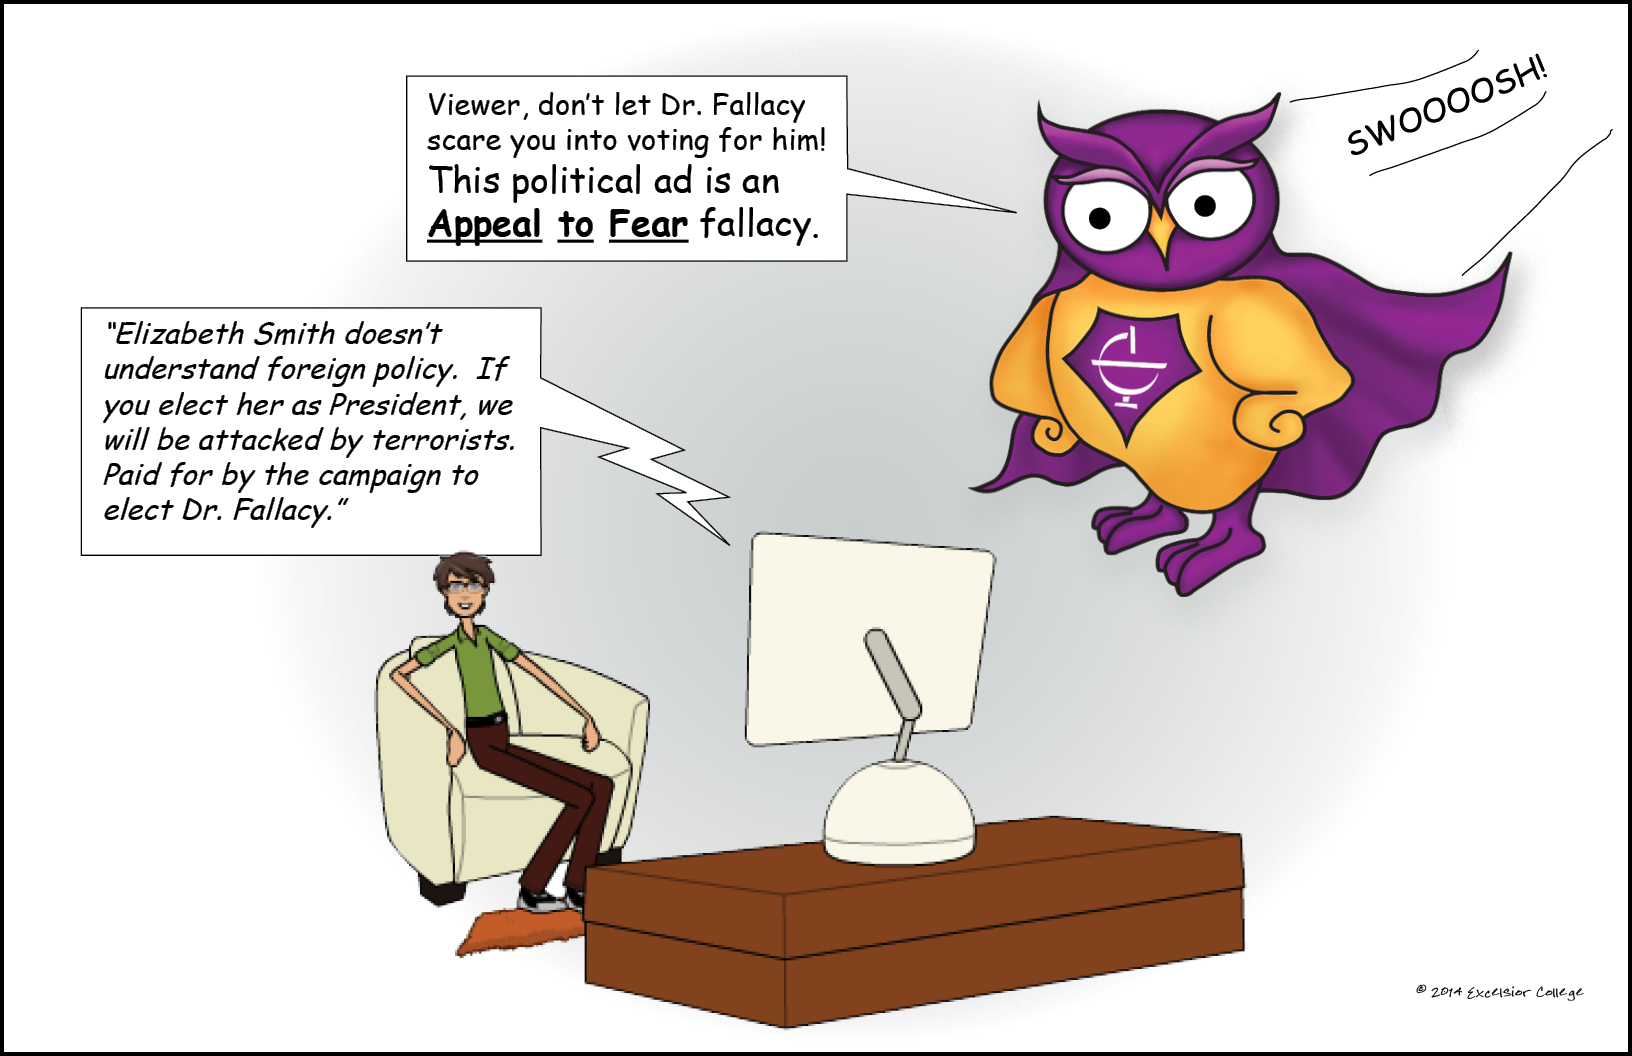 Appeal to Fear logical fallacy comic with the evil Dr. Fallacy